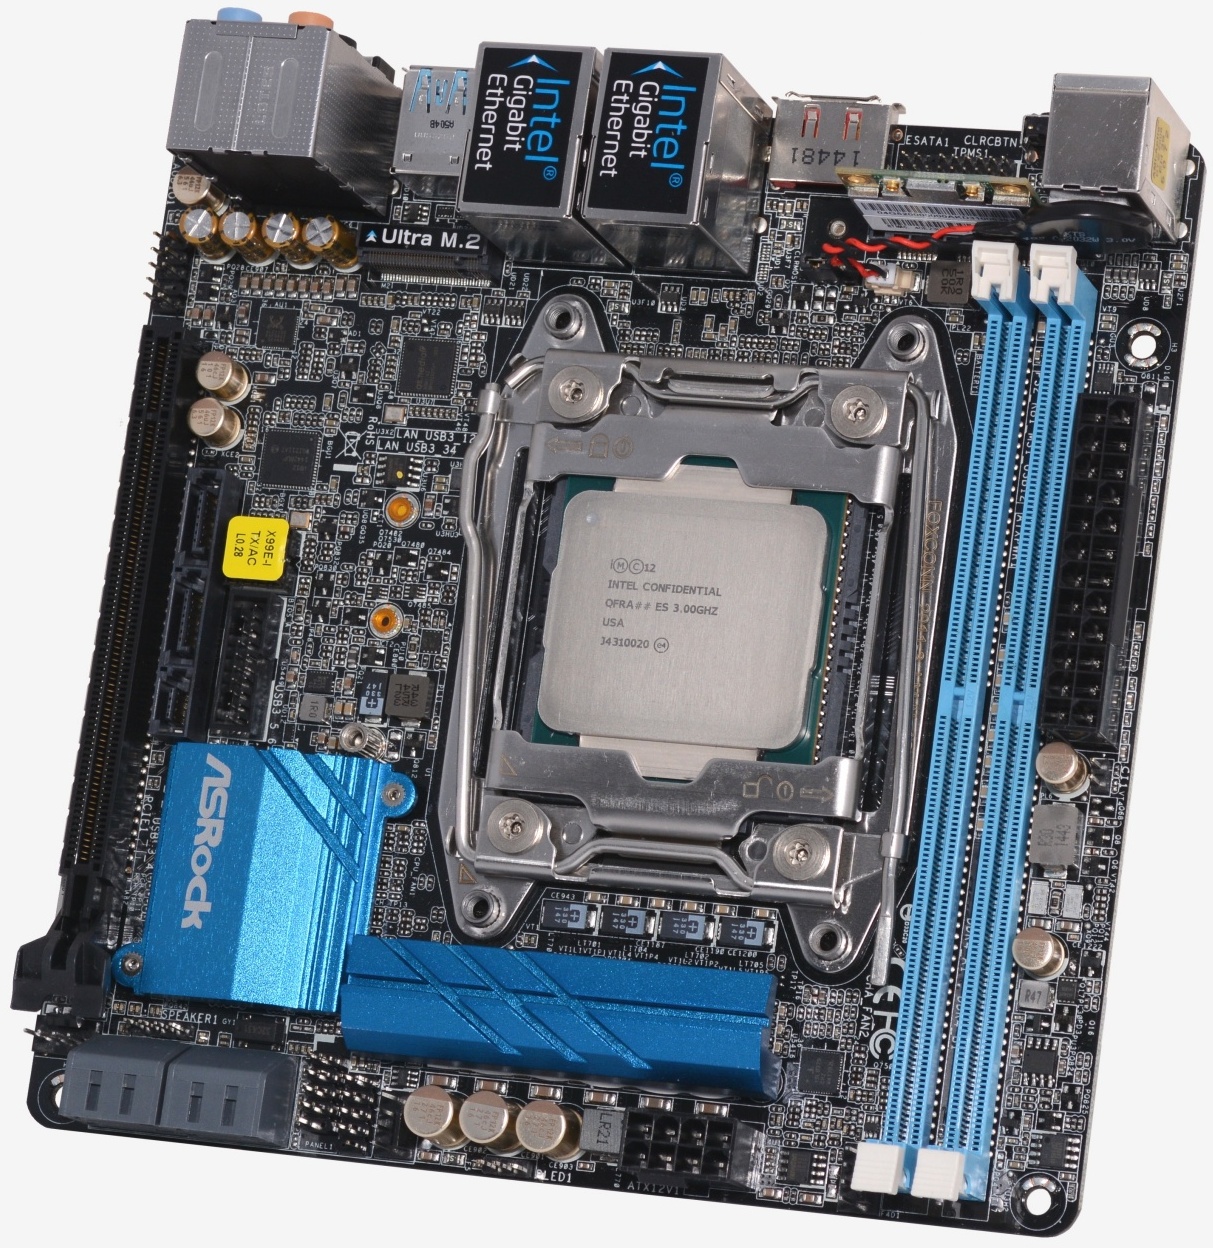 Masaccio Manifest Bourgogne Asrock X99E-ITX/ac Mini-ITX Motherboard Review > Redefining What's Possible  with Mini-ITX | TechSpot